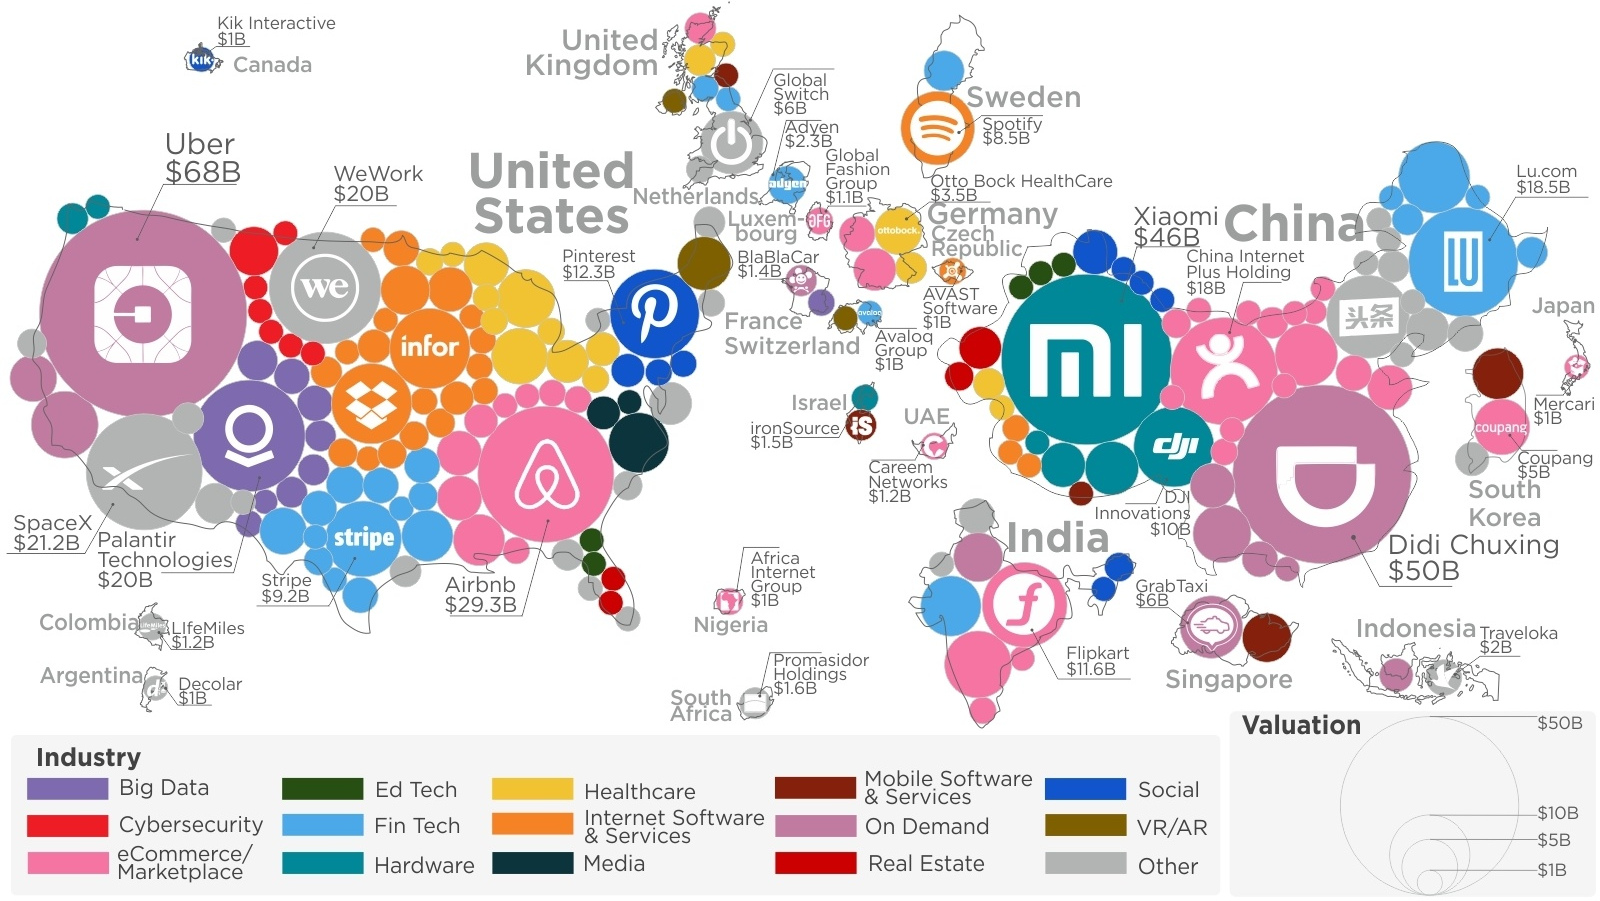 Infographic The World's 200+ Unicorns, in One Giant Map